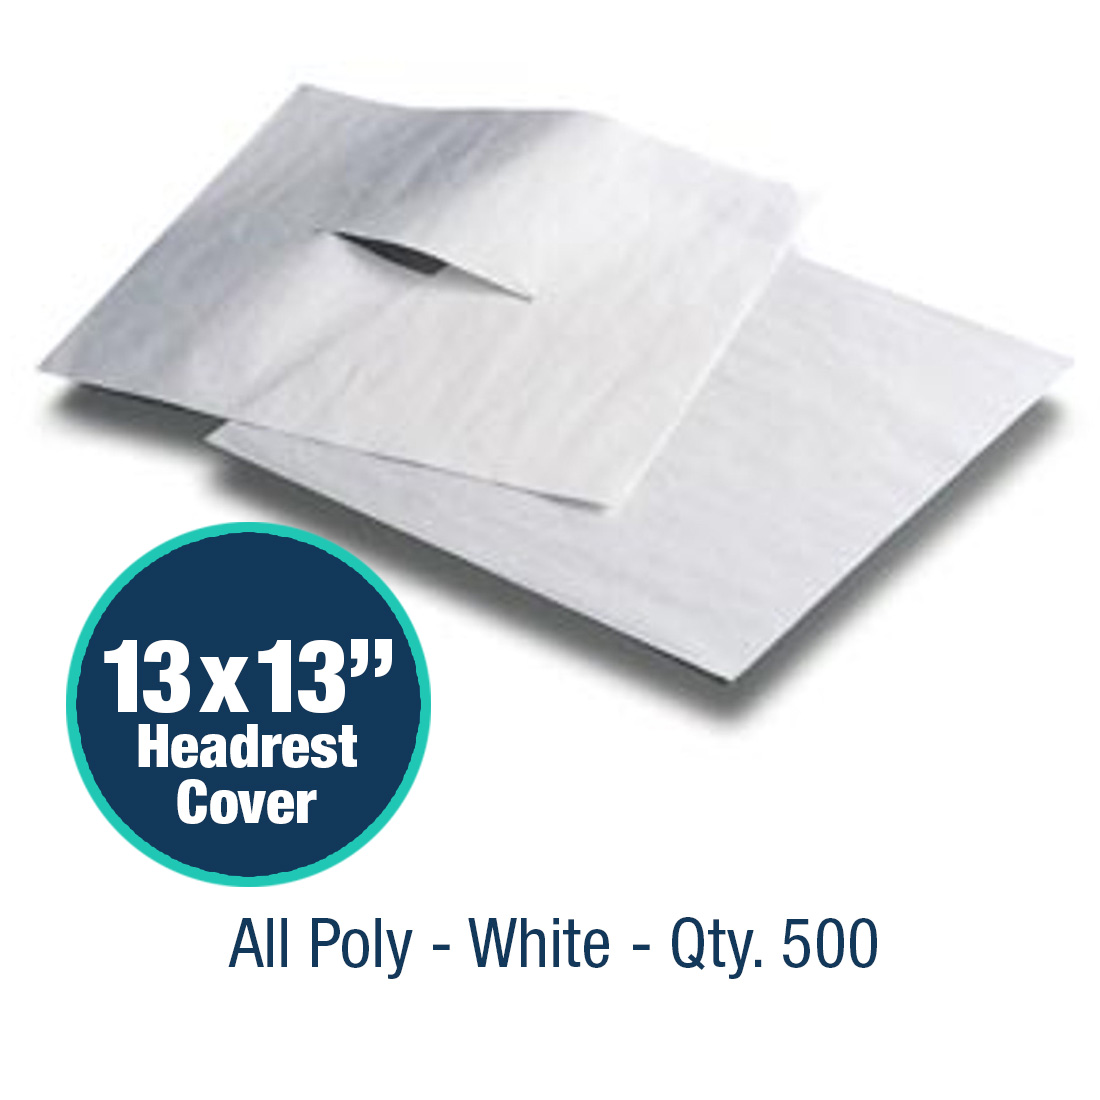 Headrest Cover 13" x 13" All Poly White - 500/Case